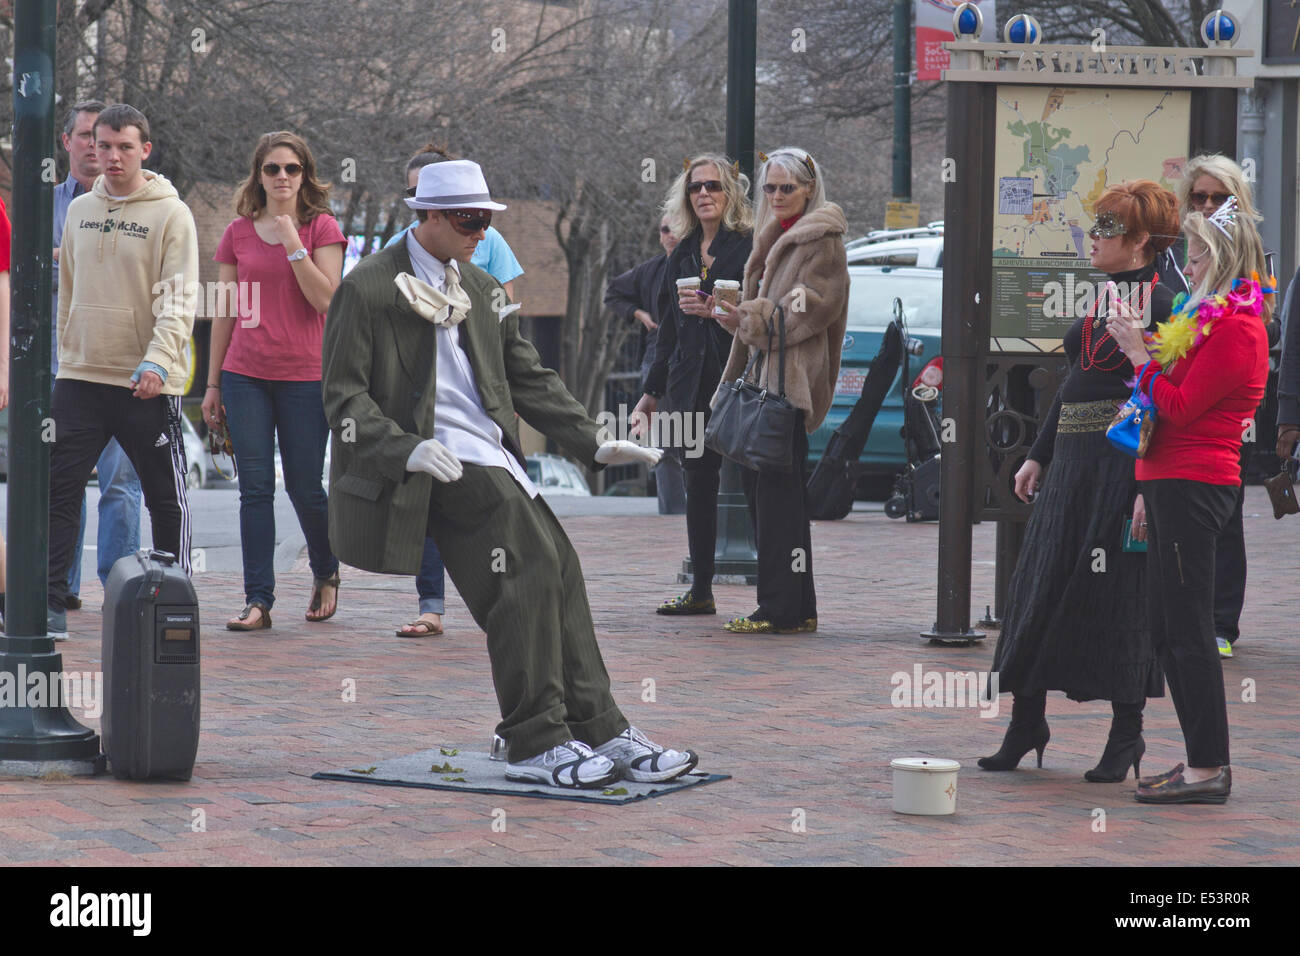 ASHEVILLE, NORTH CAROLINA, USA - MARCH 2, 2014: A male living statue street performer appears to be blown back by the wind. Stock Photo